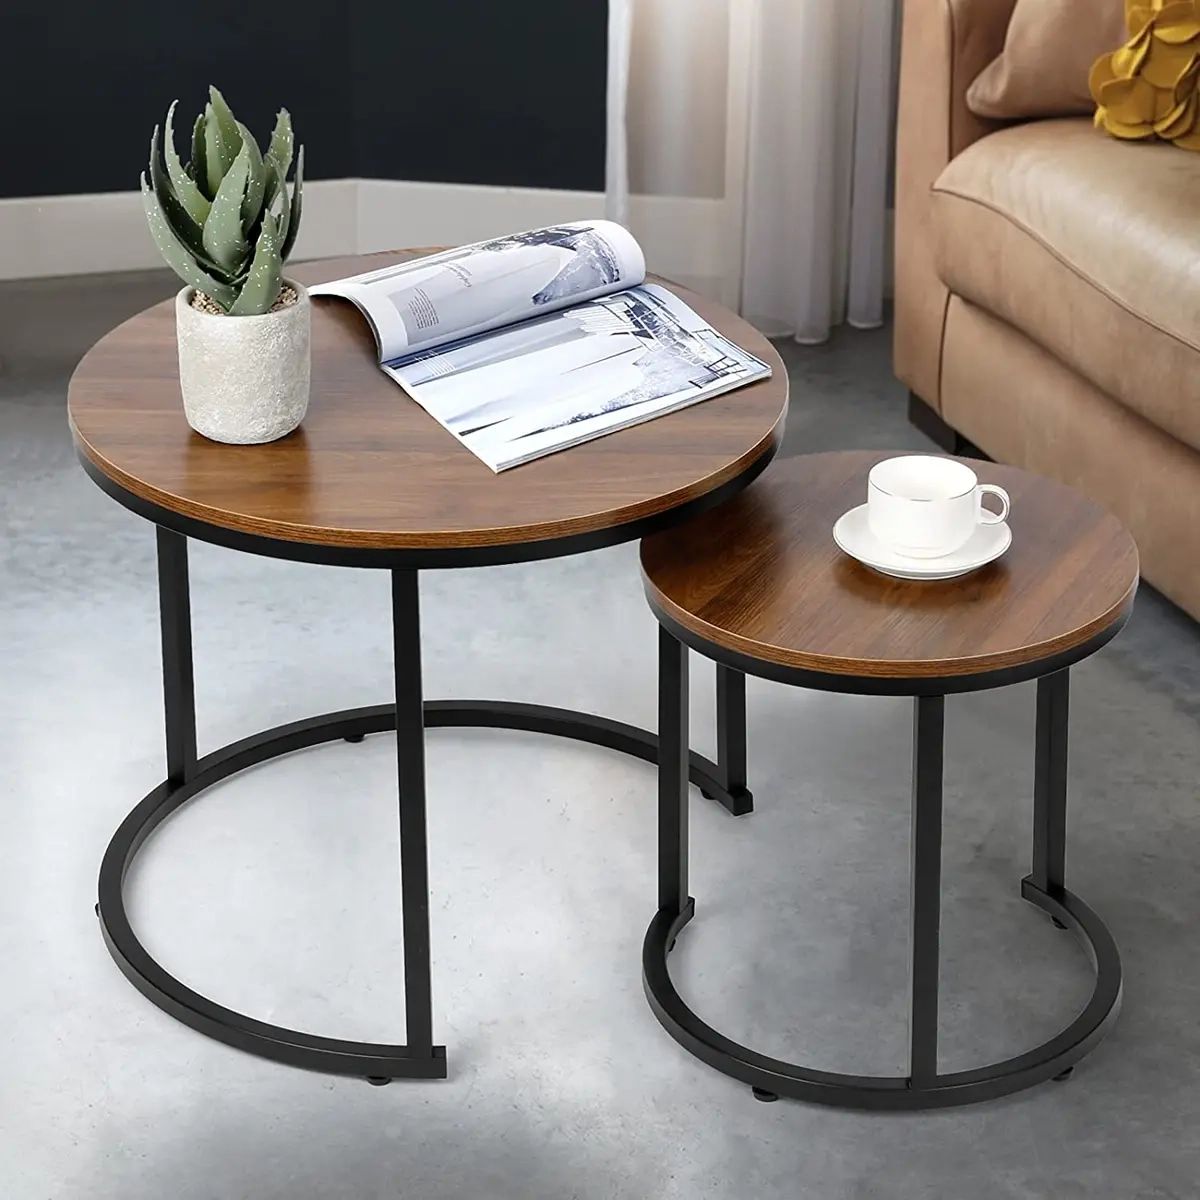 Modern Nesting Coffee Table Set Of 2 For Living Room Balcony Office, Round  Wood | Ebay Intended For Modern Nesting Coffee Tables (Photo 8 of 15)